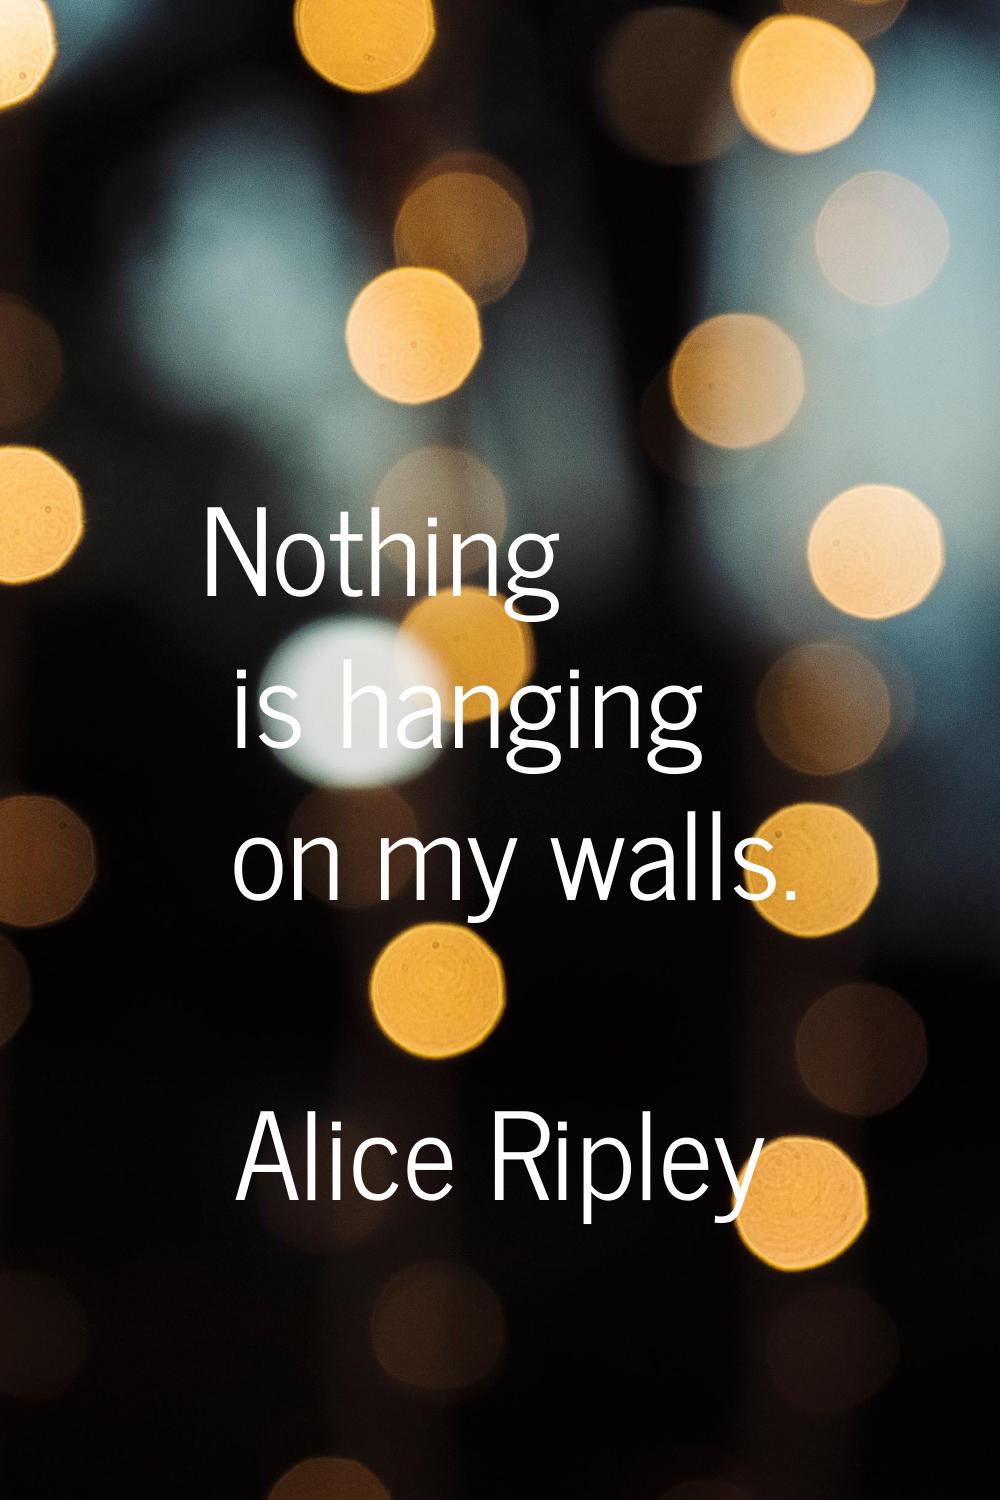 Nothing is hanging on my walls.